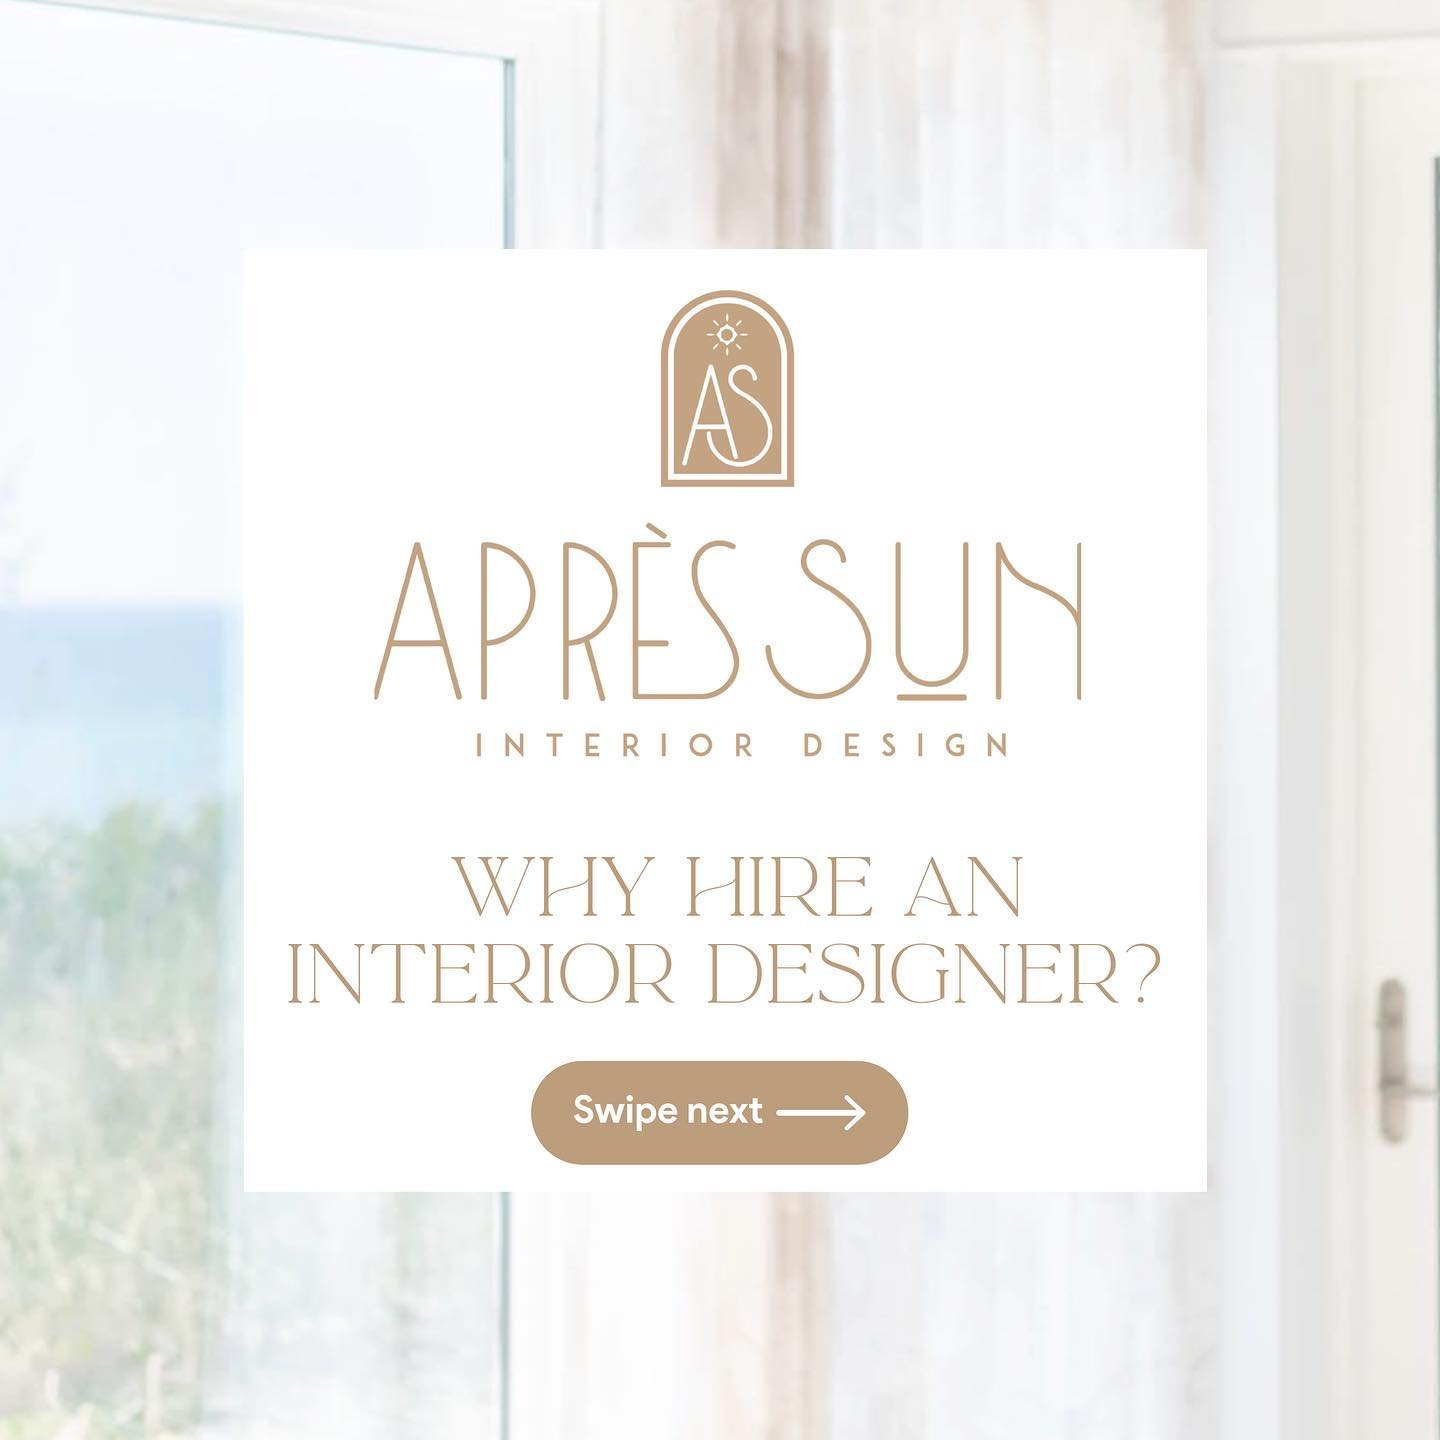 Whether you&rsquo;re renovating an existing space or starting from scratch, Apr&egrave;s Sun Interiors is here to help you every step of the way! ✨

#apr&egrave;ssuninteriors #whyhireaninteriordesigner #interiordesign #30ahomes #interiordesign #inter